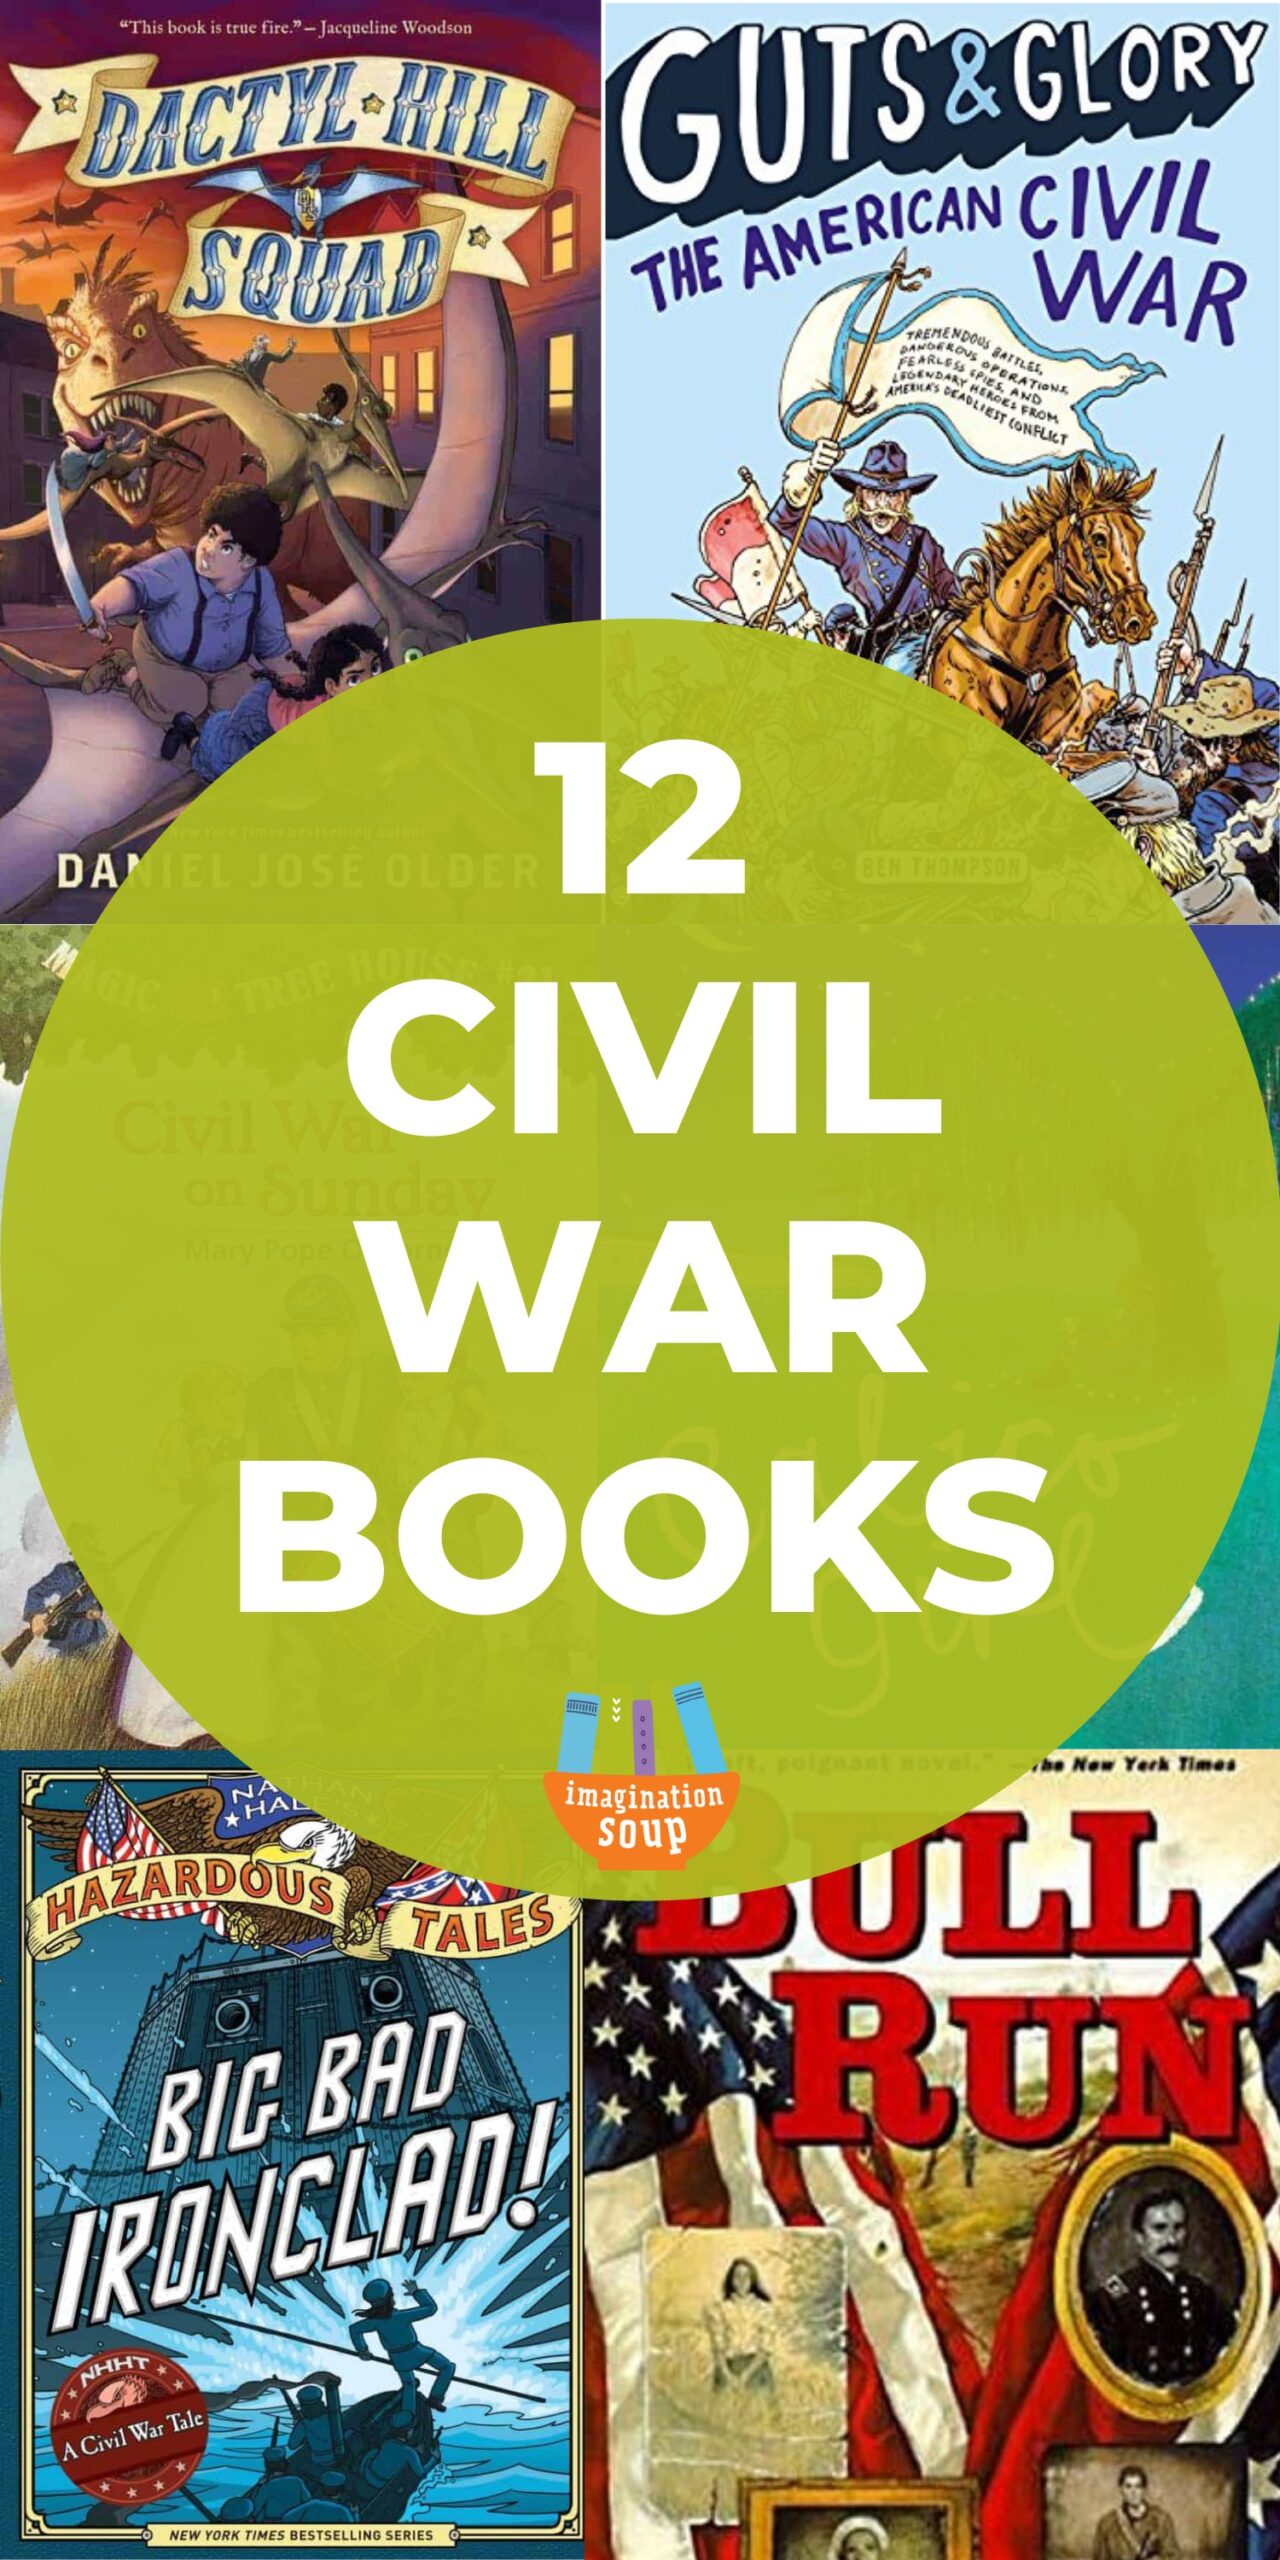 Kids studying the American Civil War benefit from reading nonfiction and historical fiction Civil War books because the details, the ambiance, and the significant events become more real through the lens of memorable stories and books. Here you'll find my picks for Civil War books for readers ages 6 - 13.